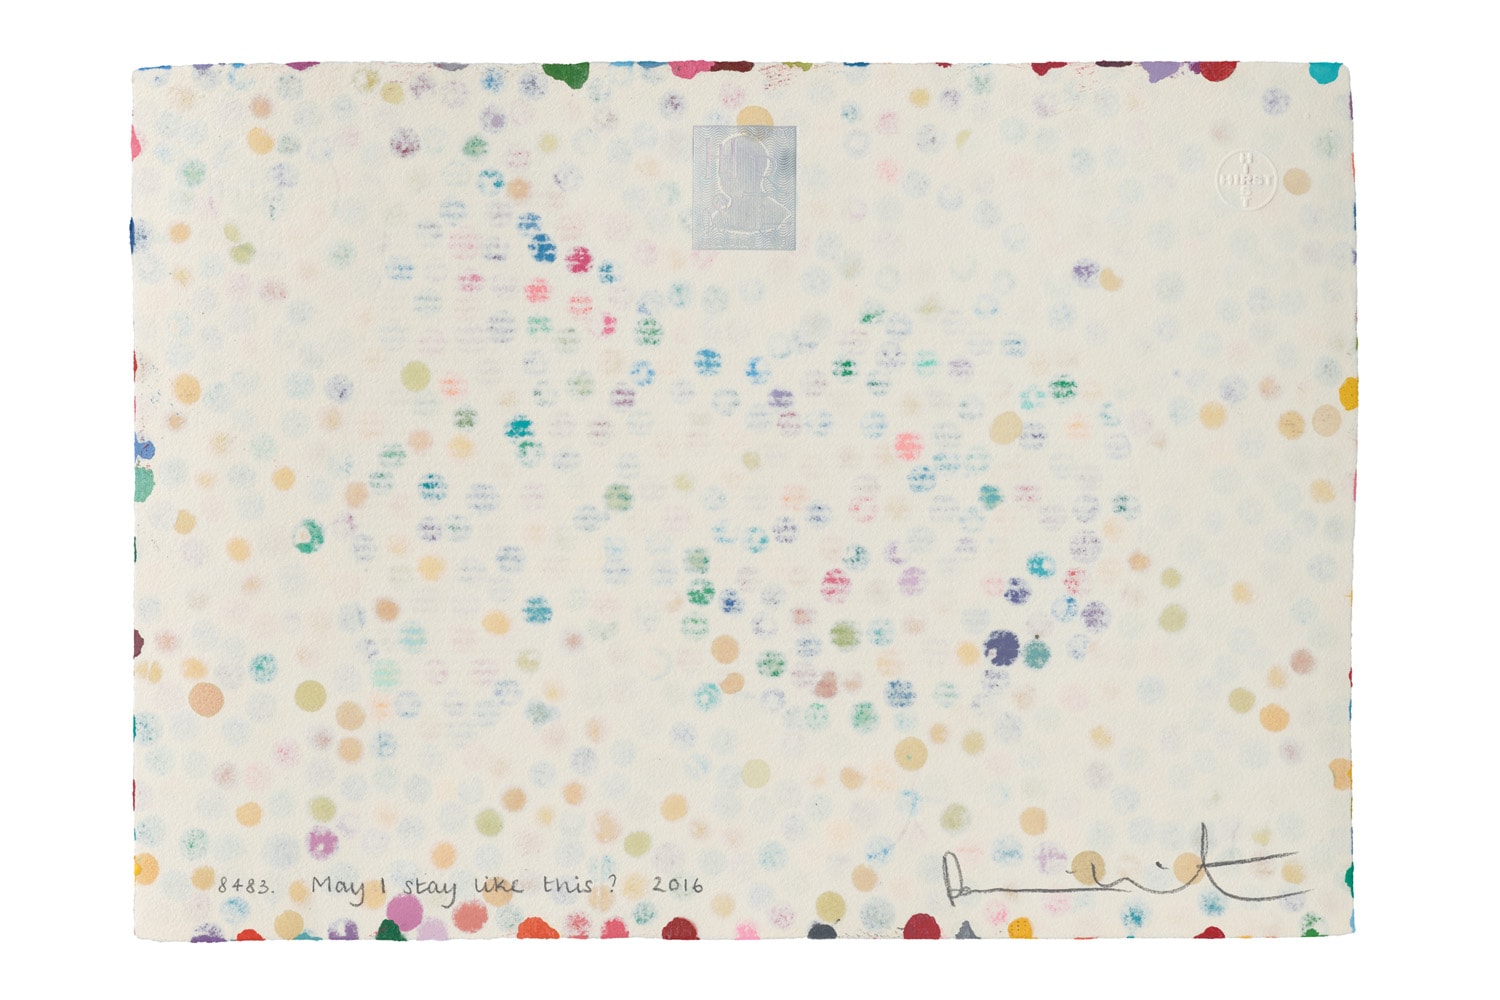 Damien Hirst HENI NFT The Currency Art Crypto